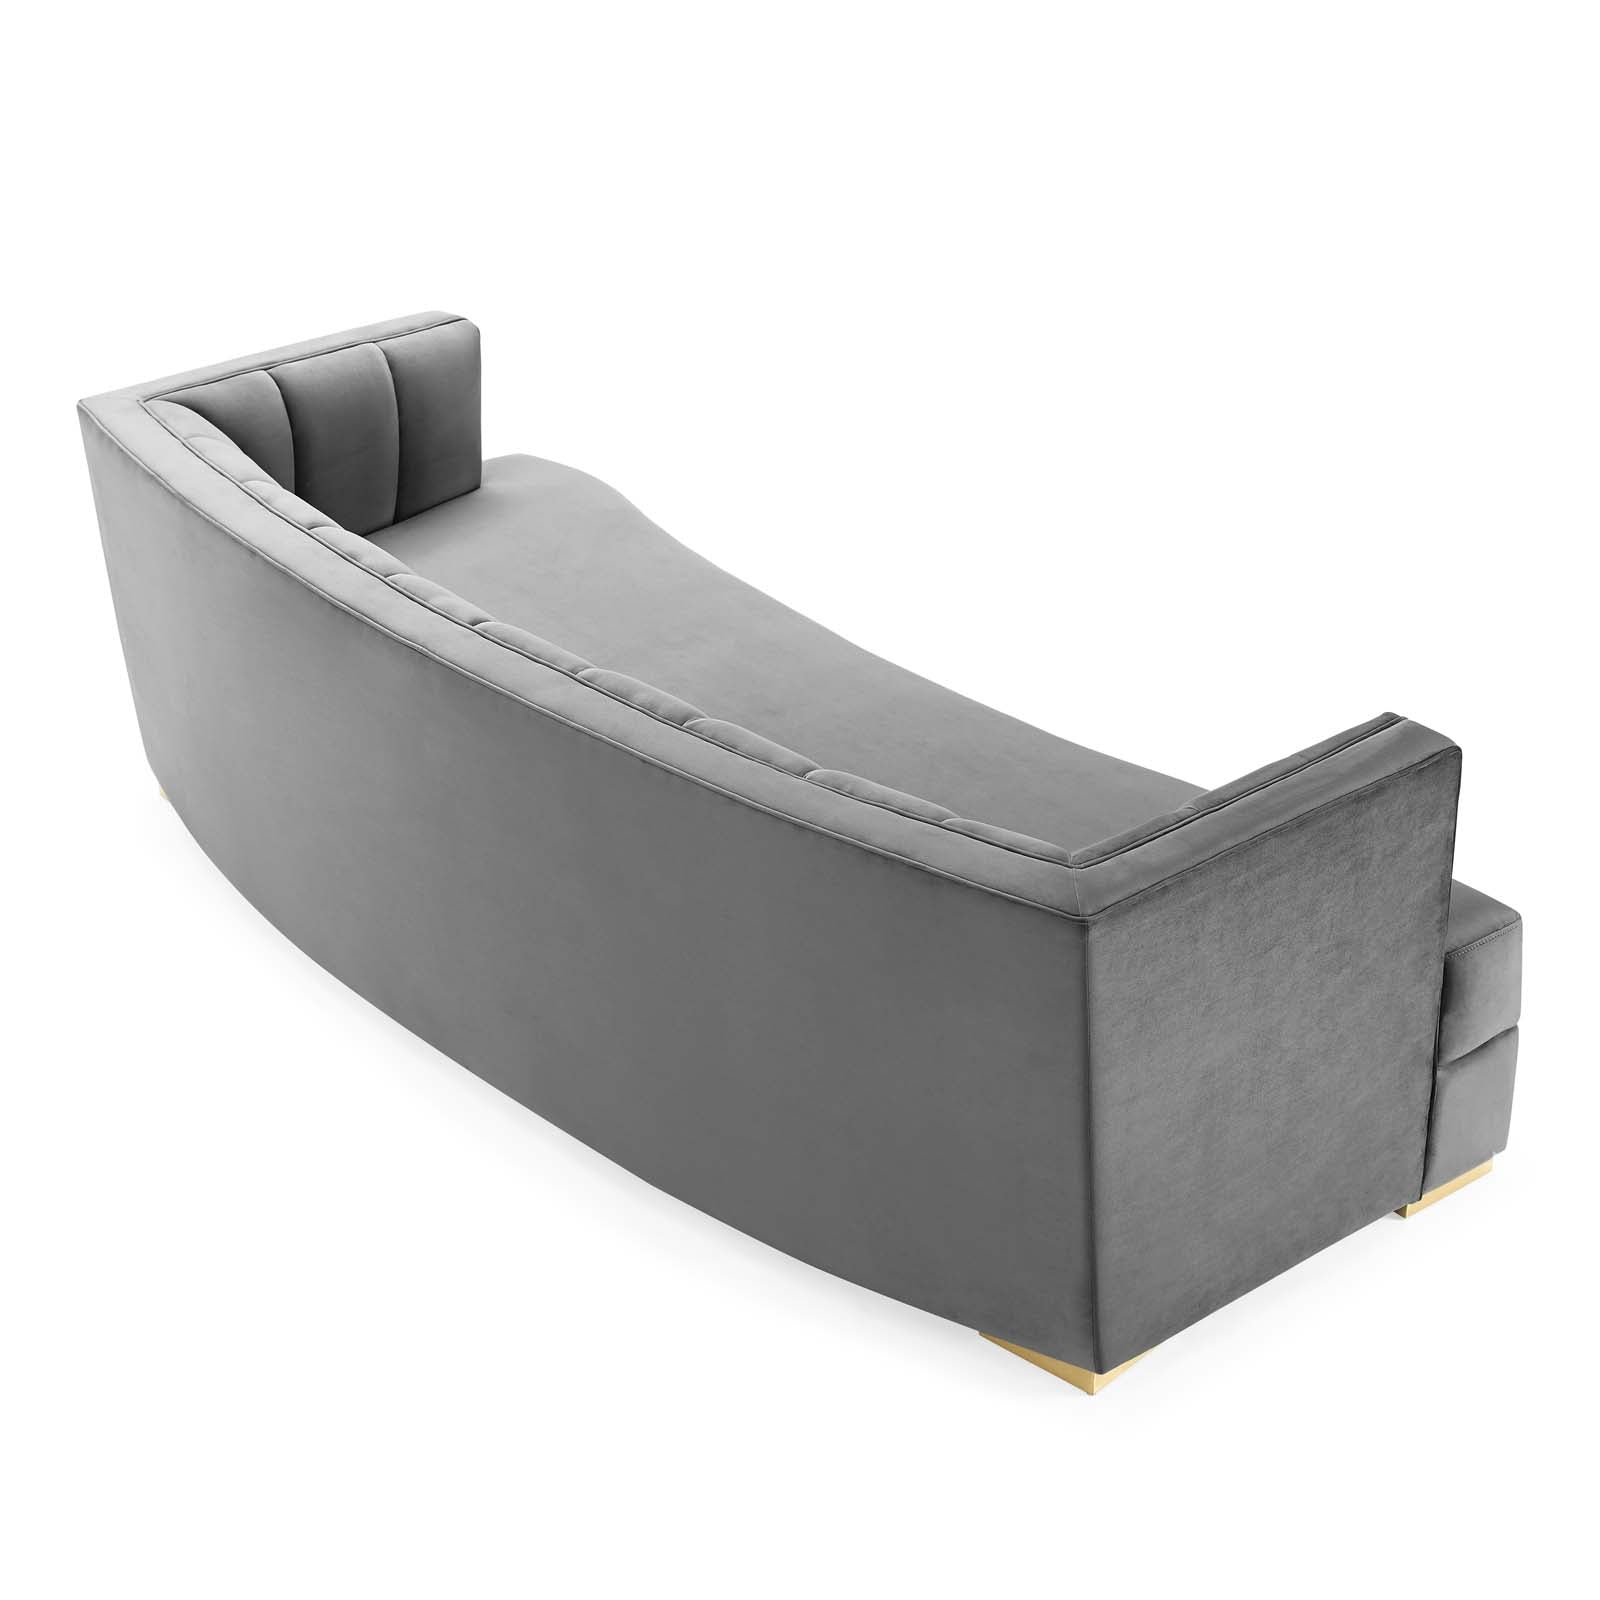 Encompass Channel Tufted Performance Velvet Curved Sofa-Sofa-Modway-Wall2Wall Furnishings